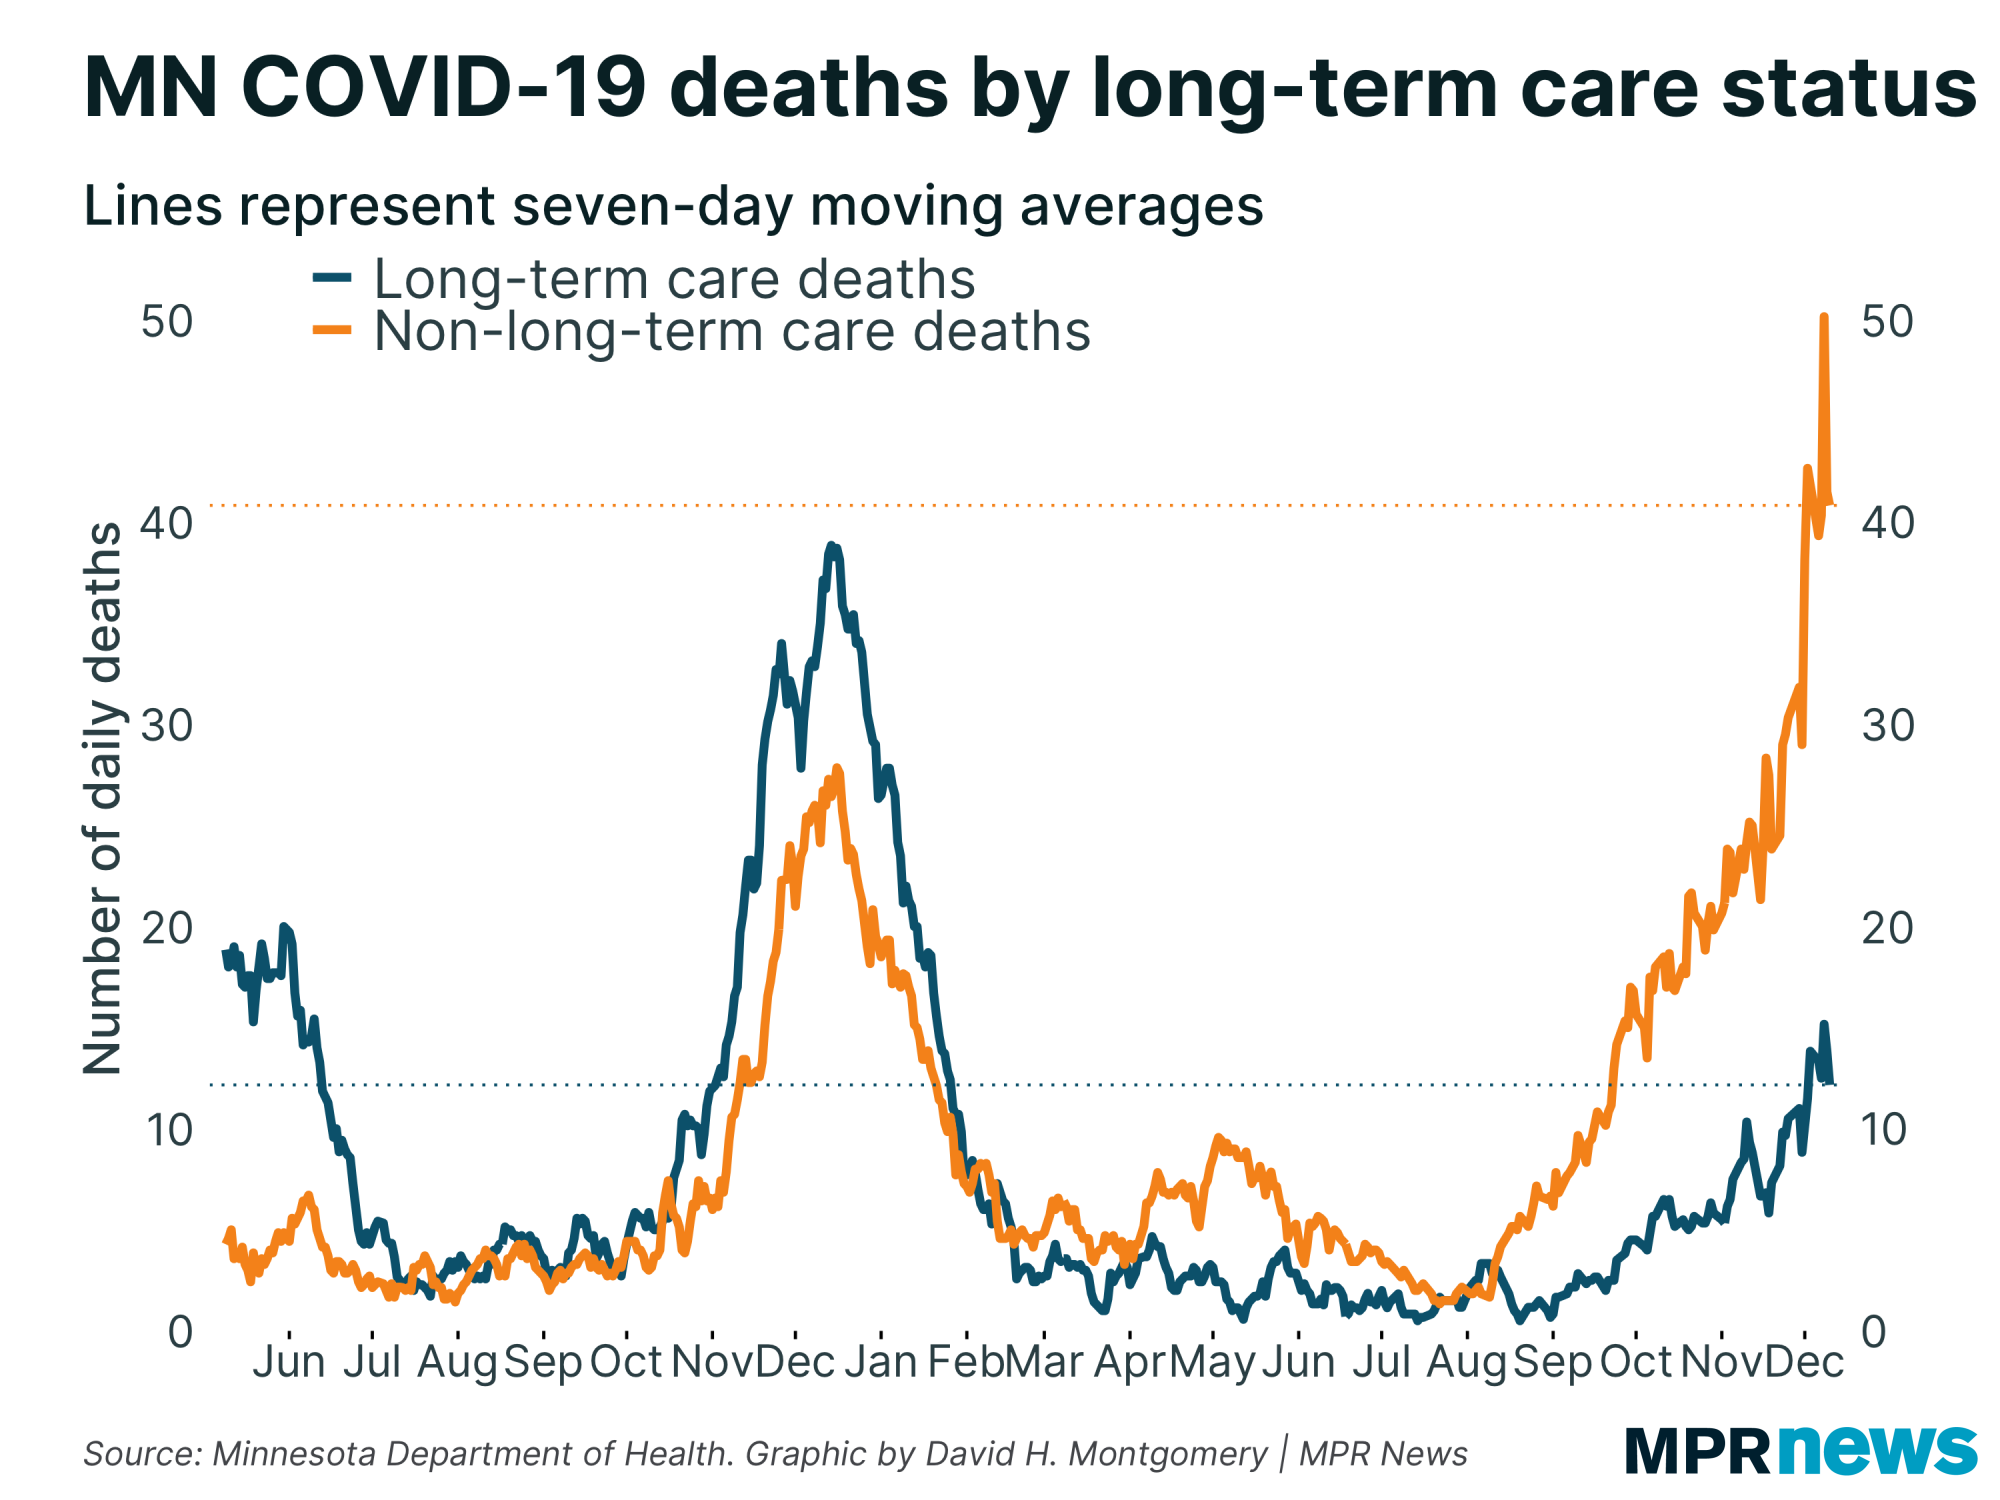 Graph of COVID-19 deaths by long-term care status